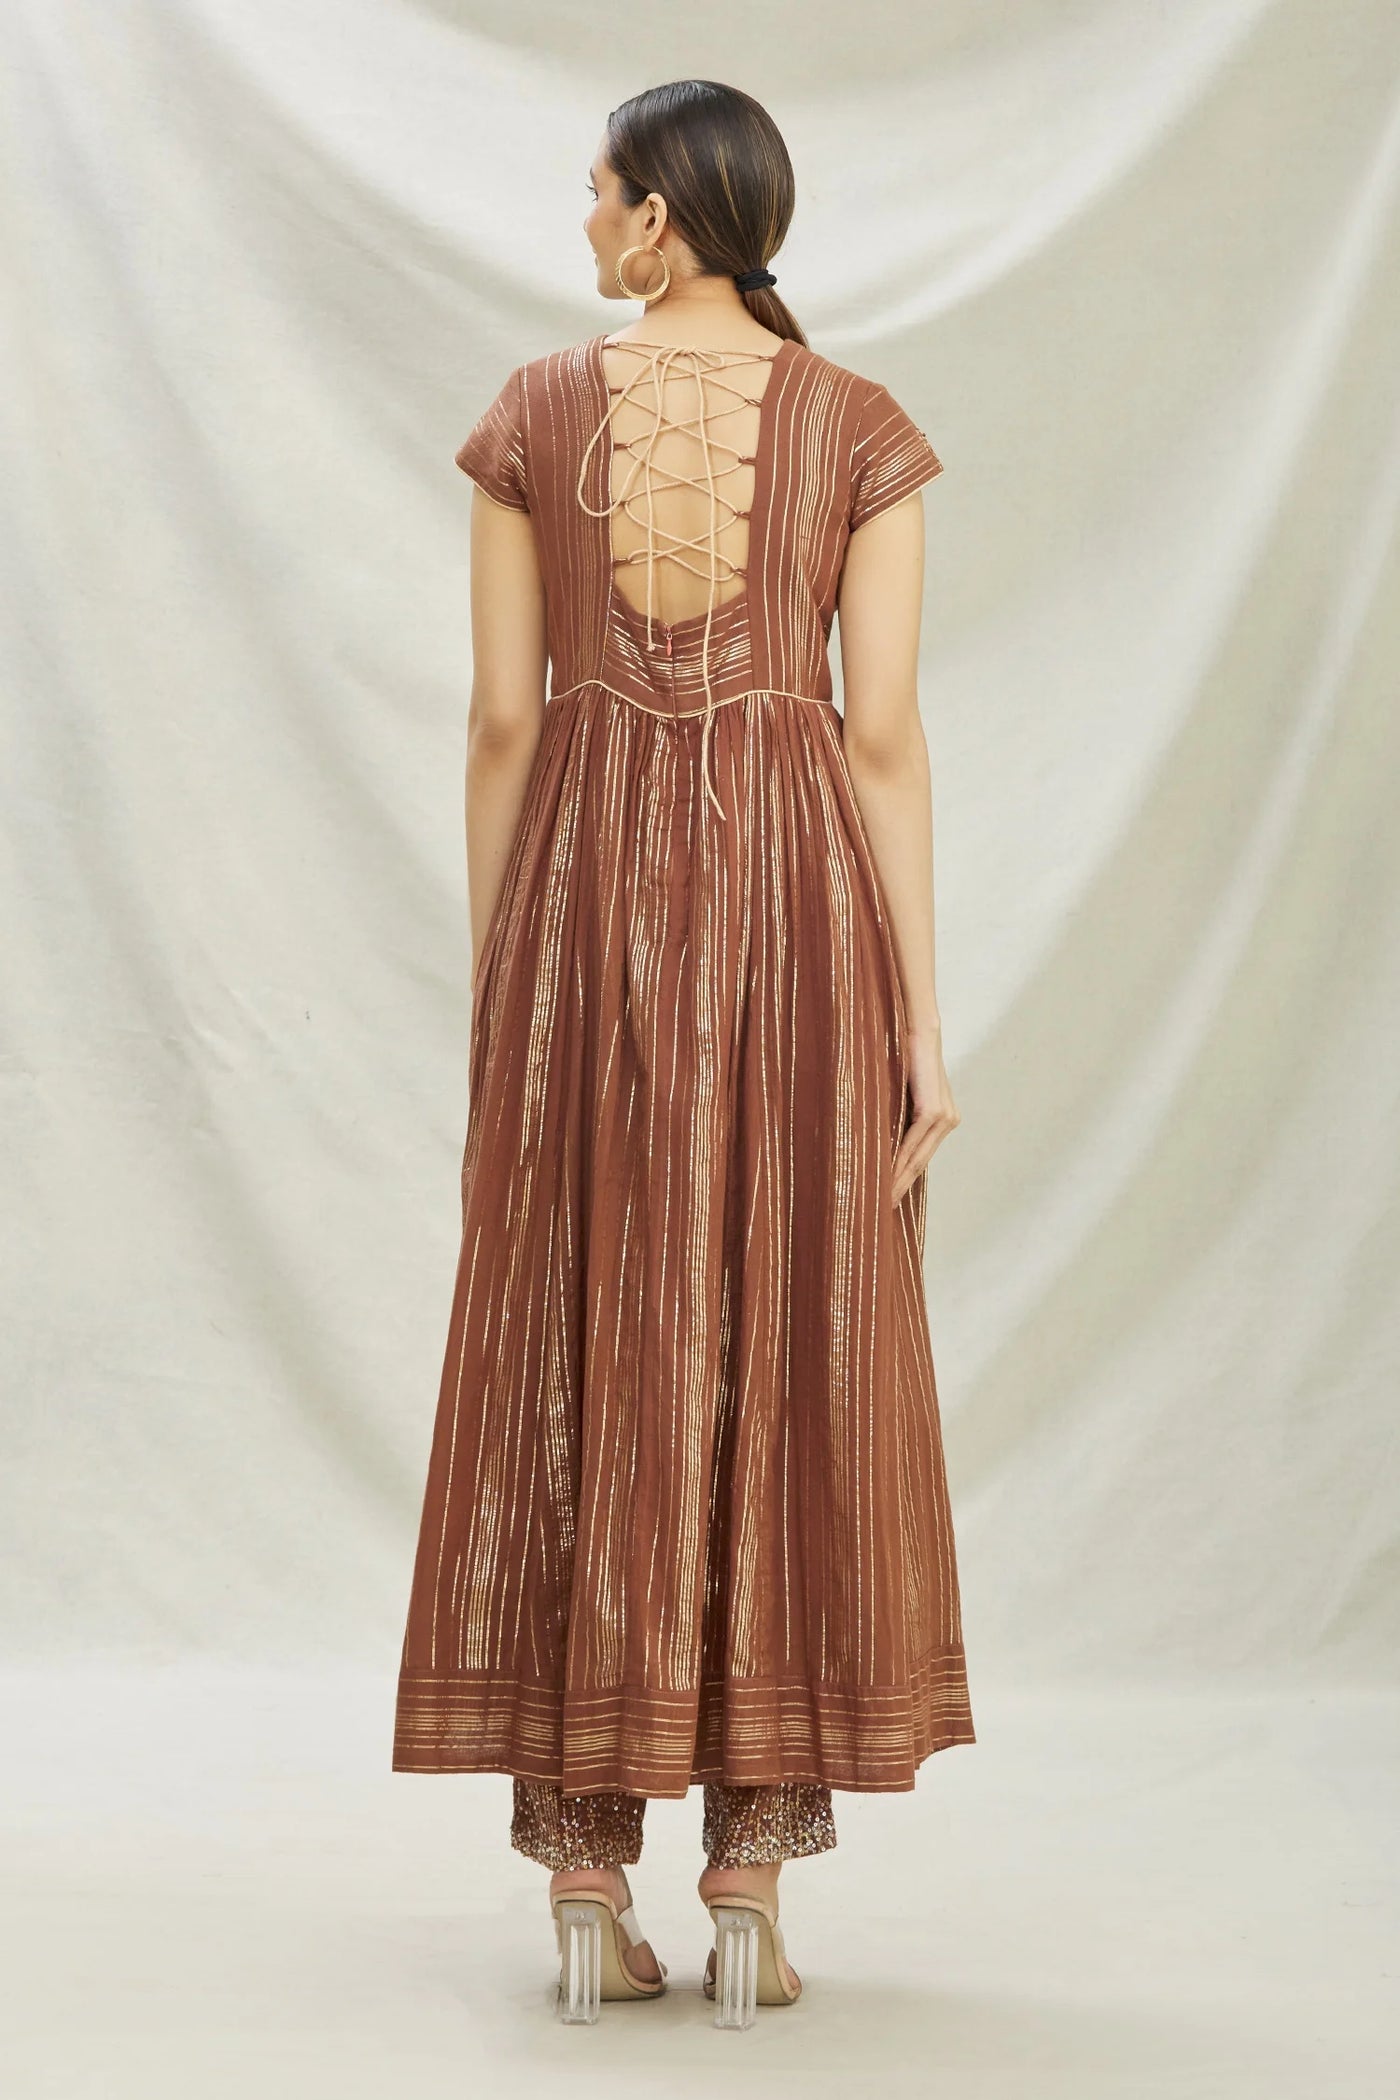 Brown Cotton Anarkali Set Indian Clothing in Denver, CO, Aurora, CO, Boulder, CO, Fort Collins, CO, Colorado Springs, CO, Parker, CO, Highlands Ranch, CO, Cherry Creek, CO, Centennial, CO, and Longmont, CO. NATIONWIDE SHIPPING USA- India Fashion X